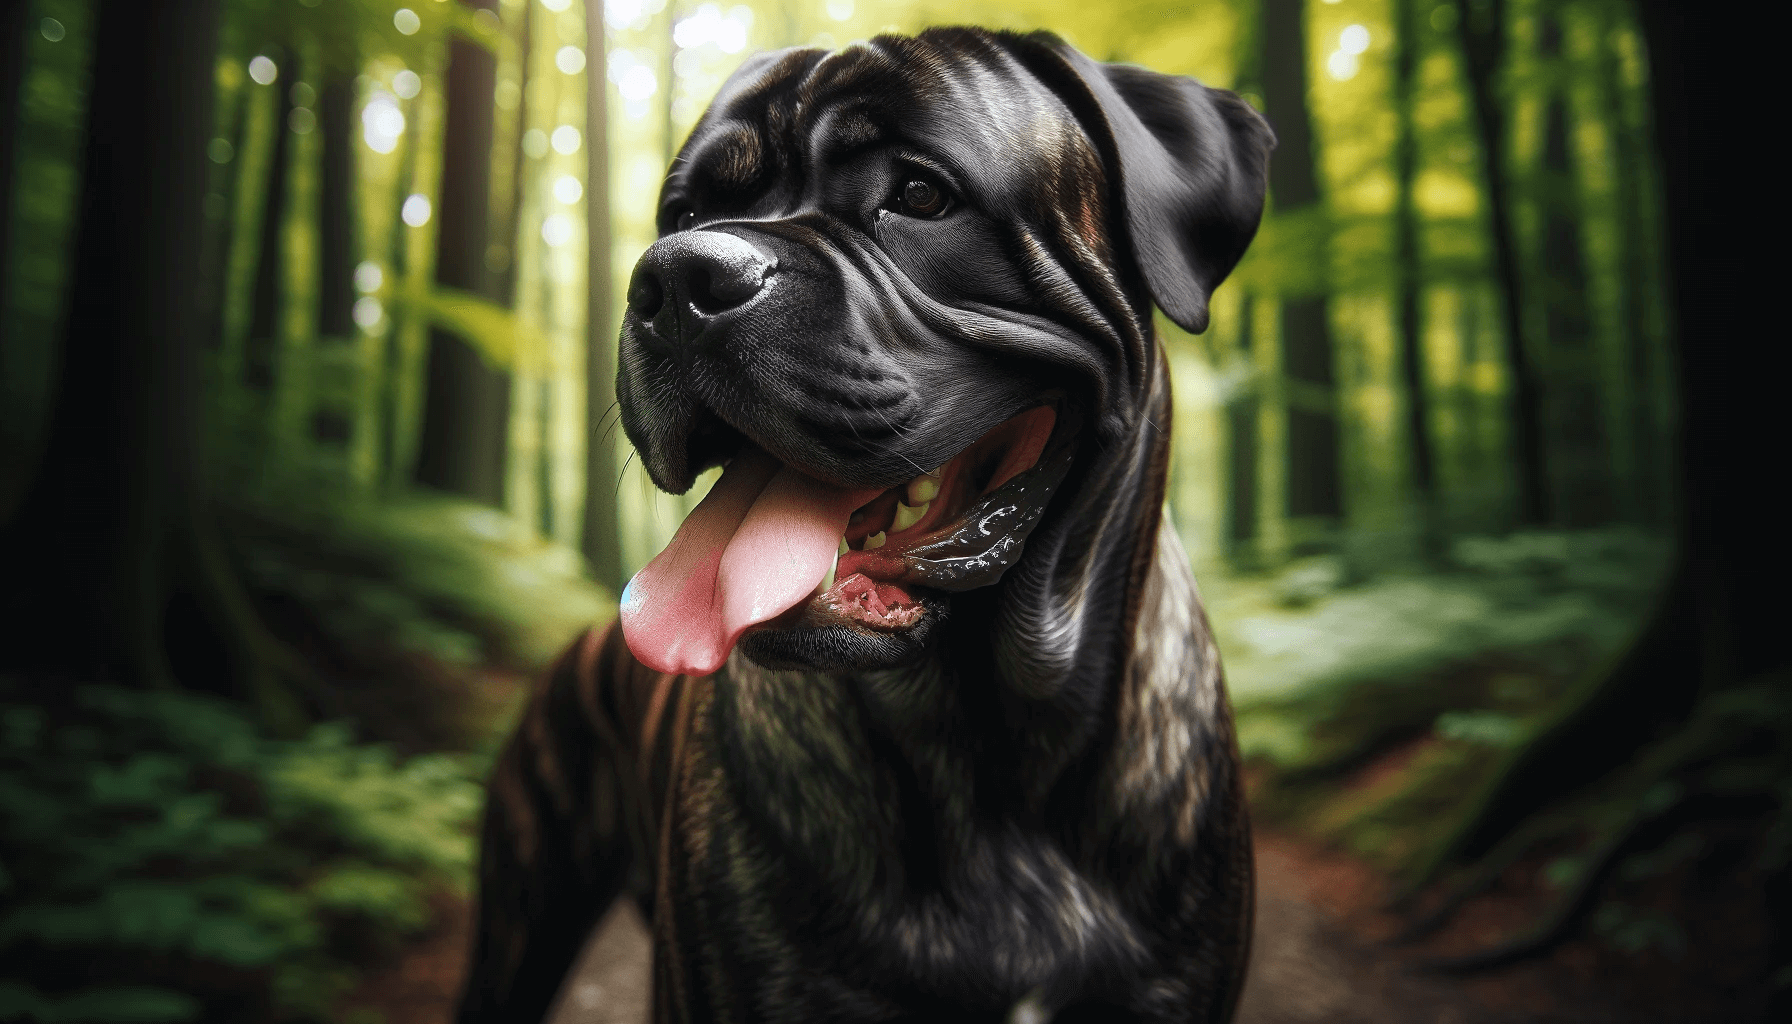 A brindle Cane Corso dog standing in a forested area with its tongue lolling out in a happy pant, enjoying the natural surroundings.